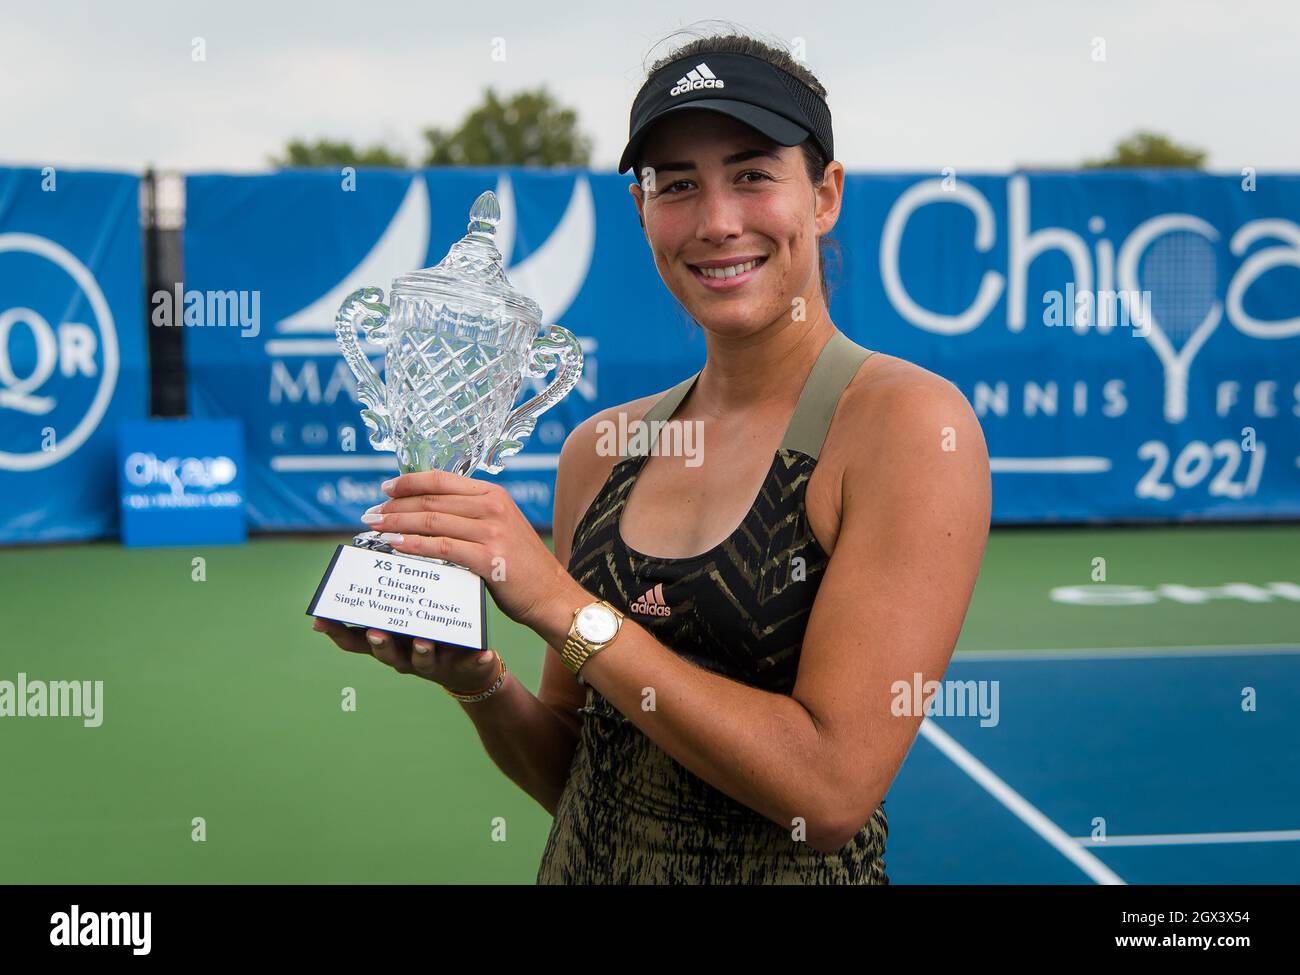 Chicago, USA. 03rd Oct, 2021. Garbine Muguruza of Spain poses with the  champions trophy after winning the final of the 2021 Chicago Fall Tennis  Classic WTA 500 tennis tournament on October 3,